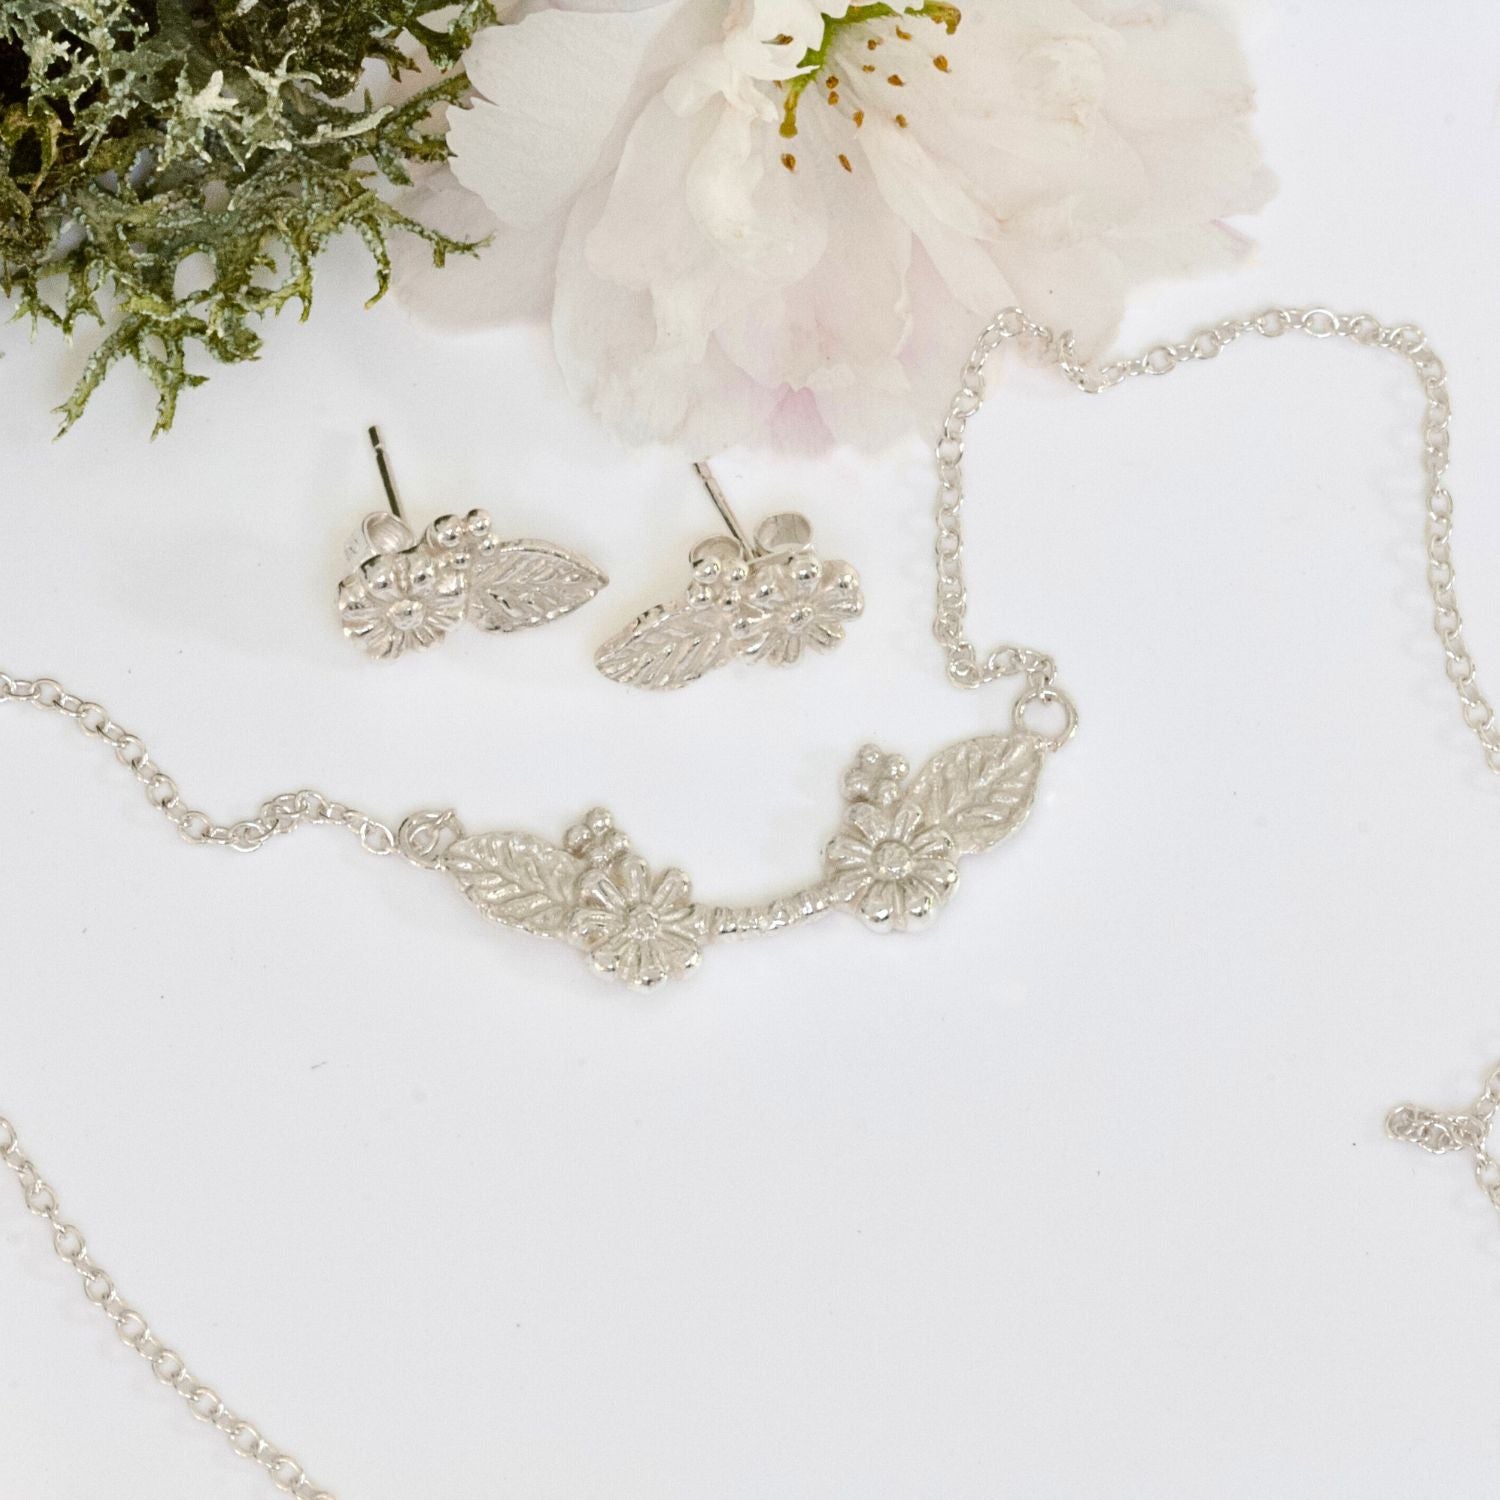 silver daisy necklace and earring set